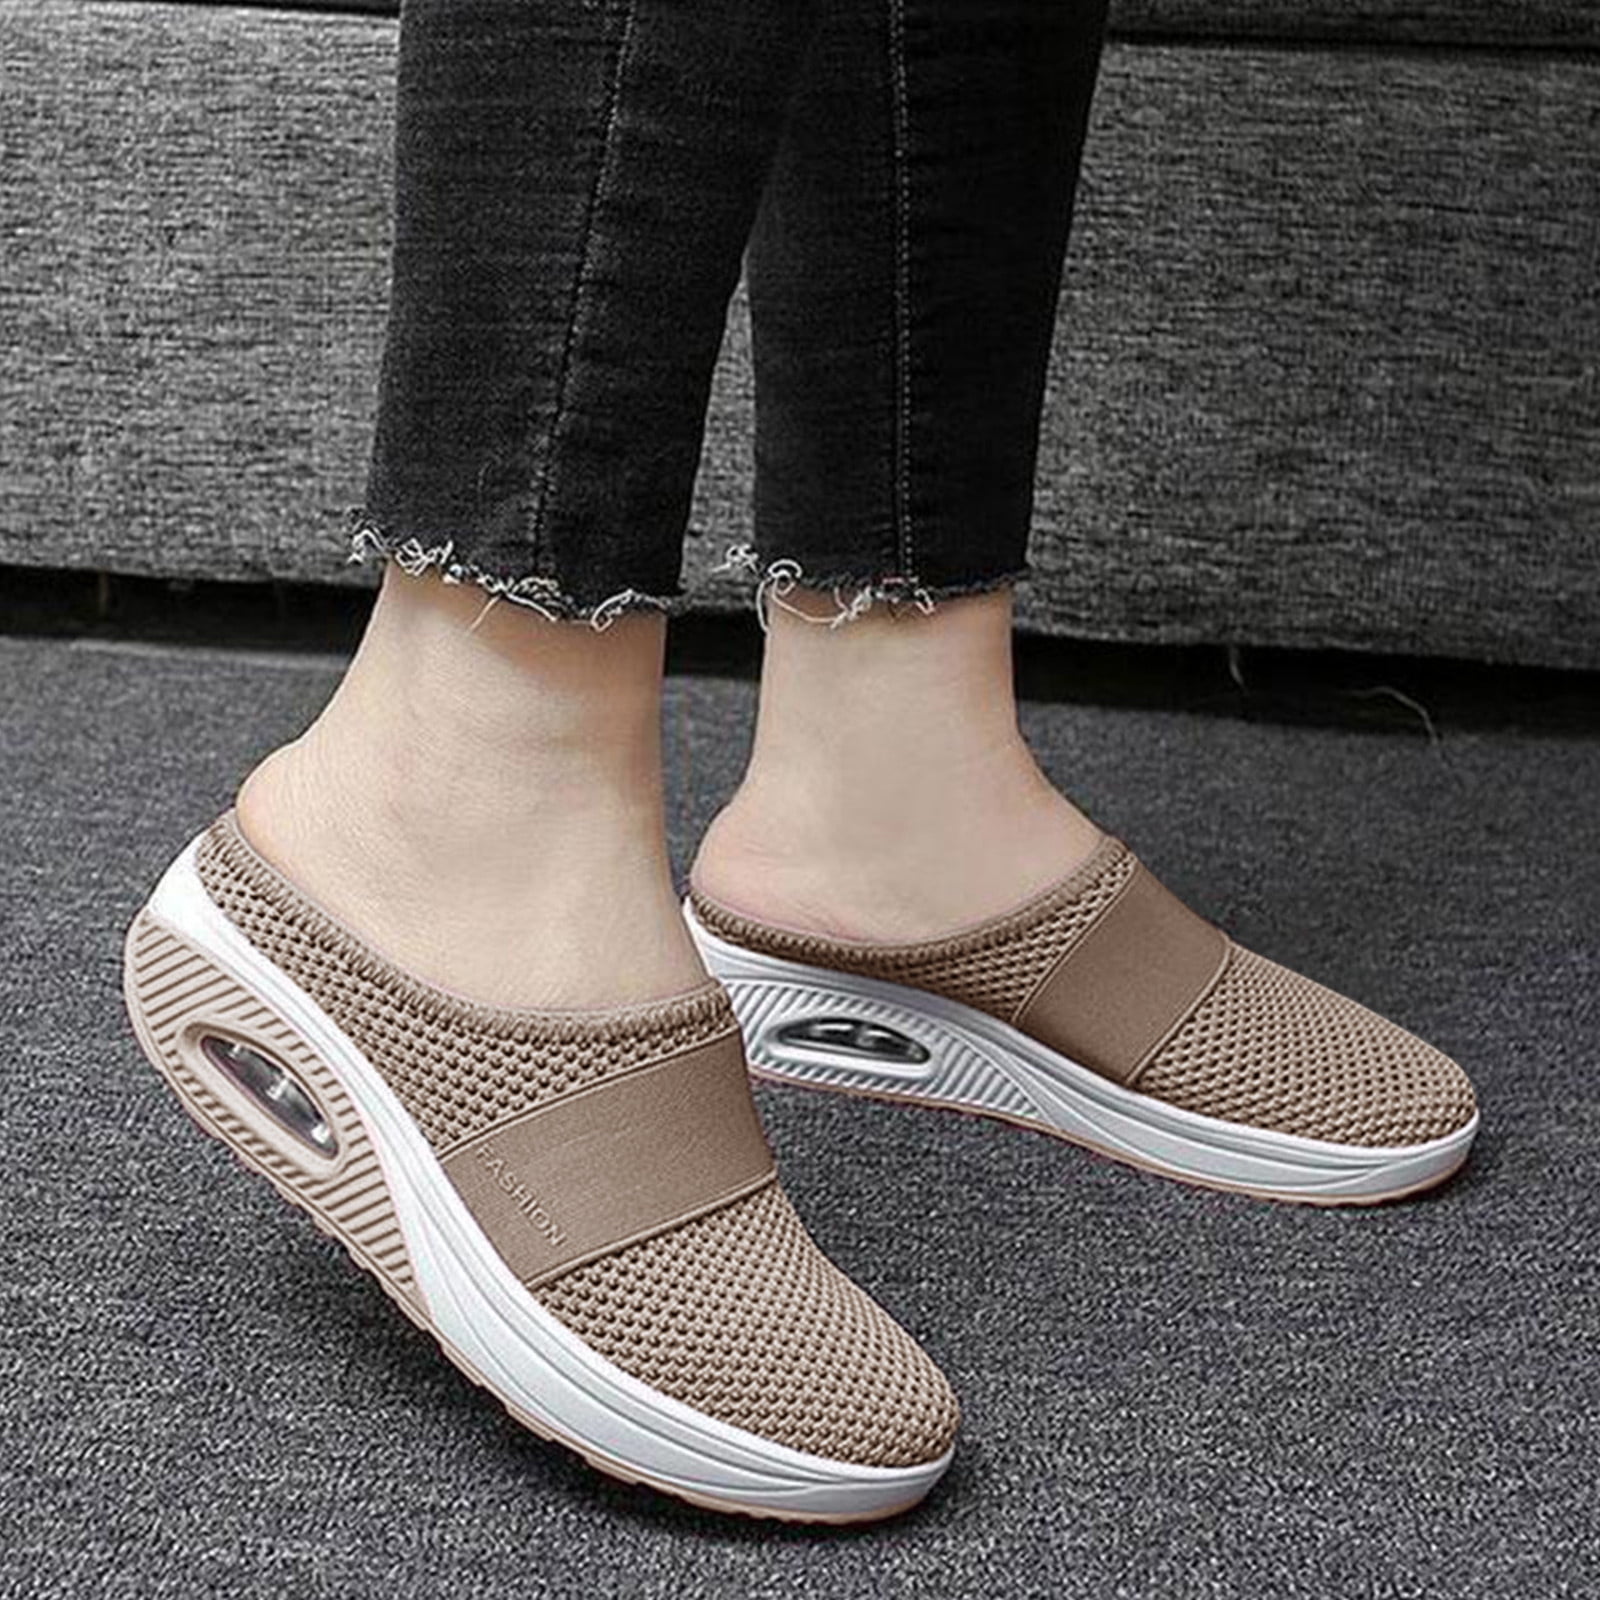 Super Soft Women's Walking Shoes Air Cushion Platform Loafers Fashion Casual Women's Orthopedic Air Cushioned Sole Flying Woven Sneakers Blue,35